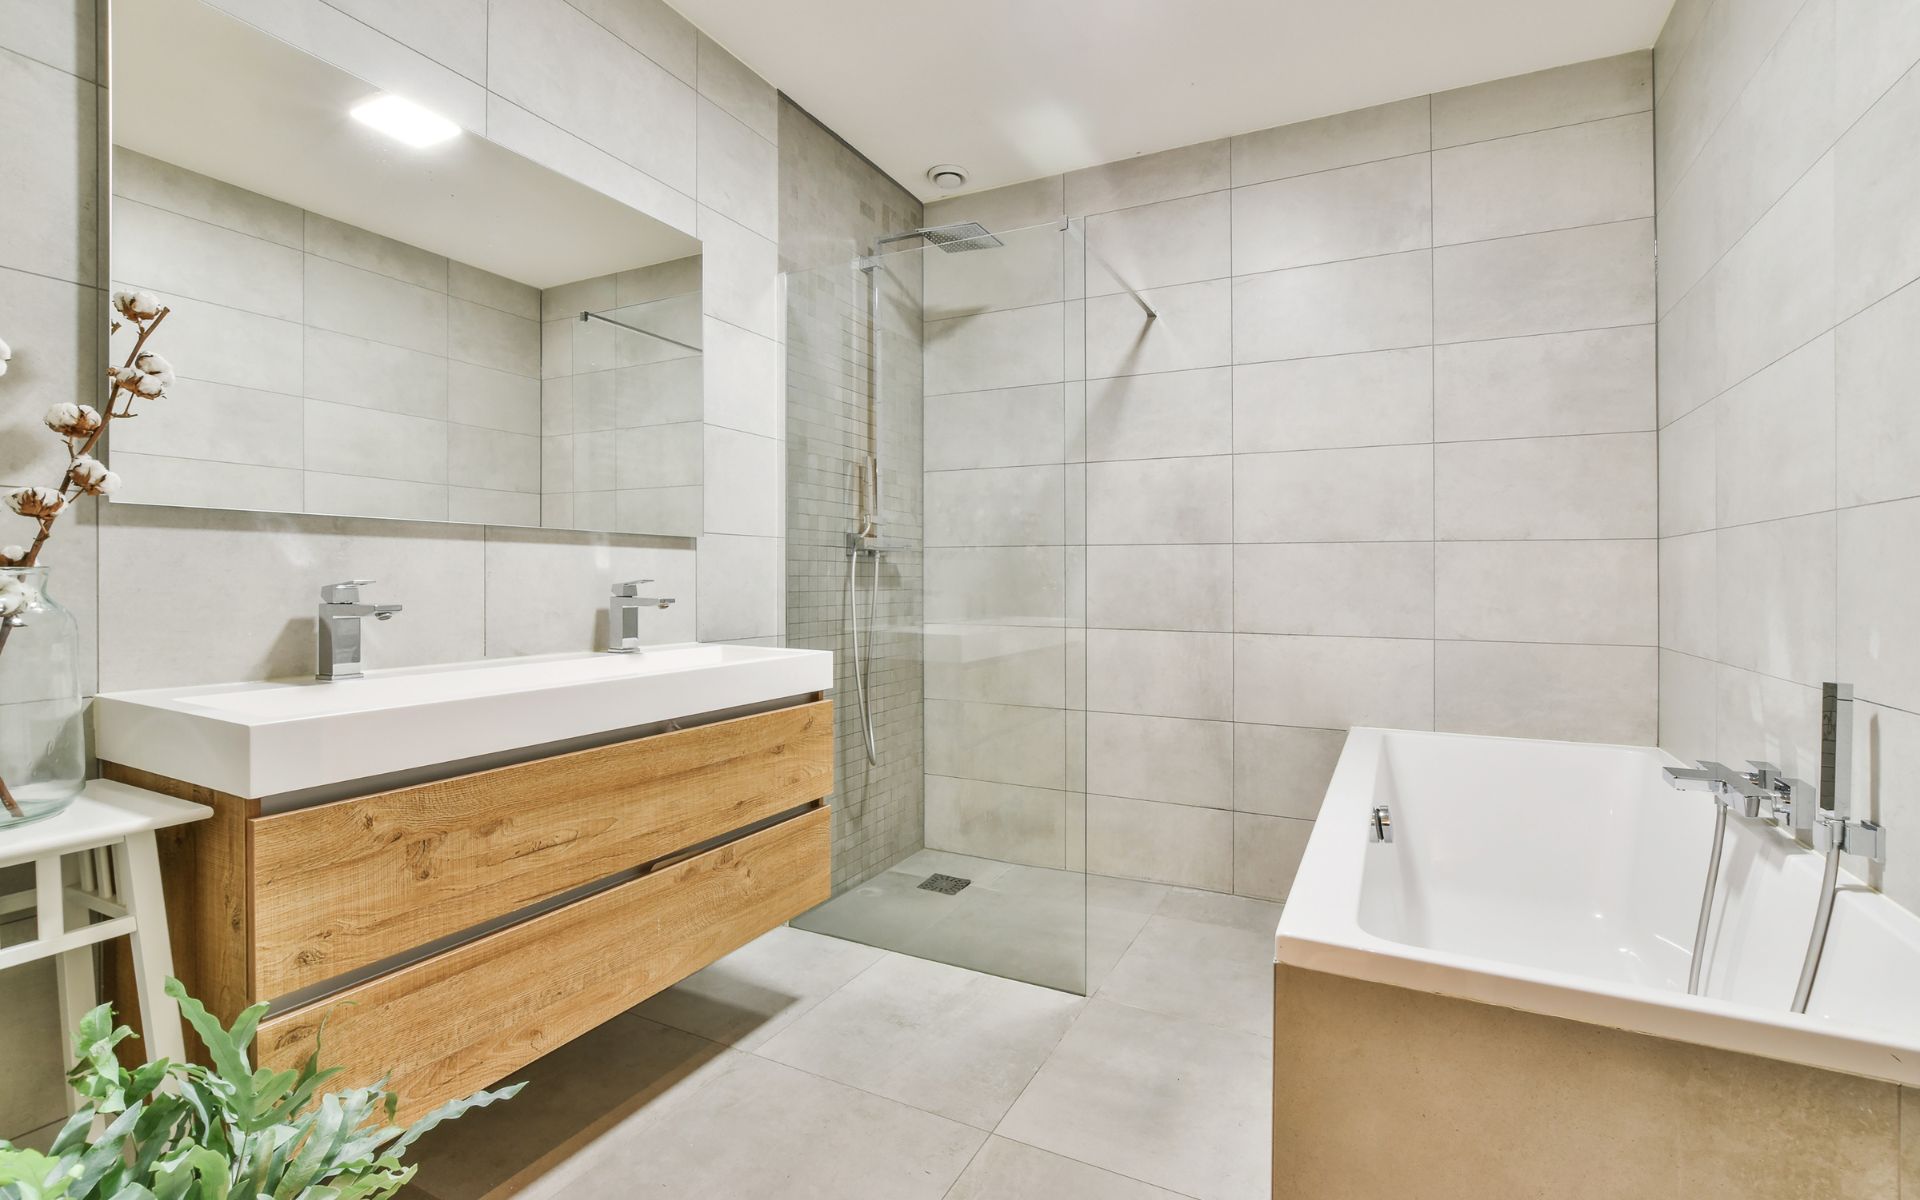 Transform Your Bathroom in Just One Day with a Shower Remodel!